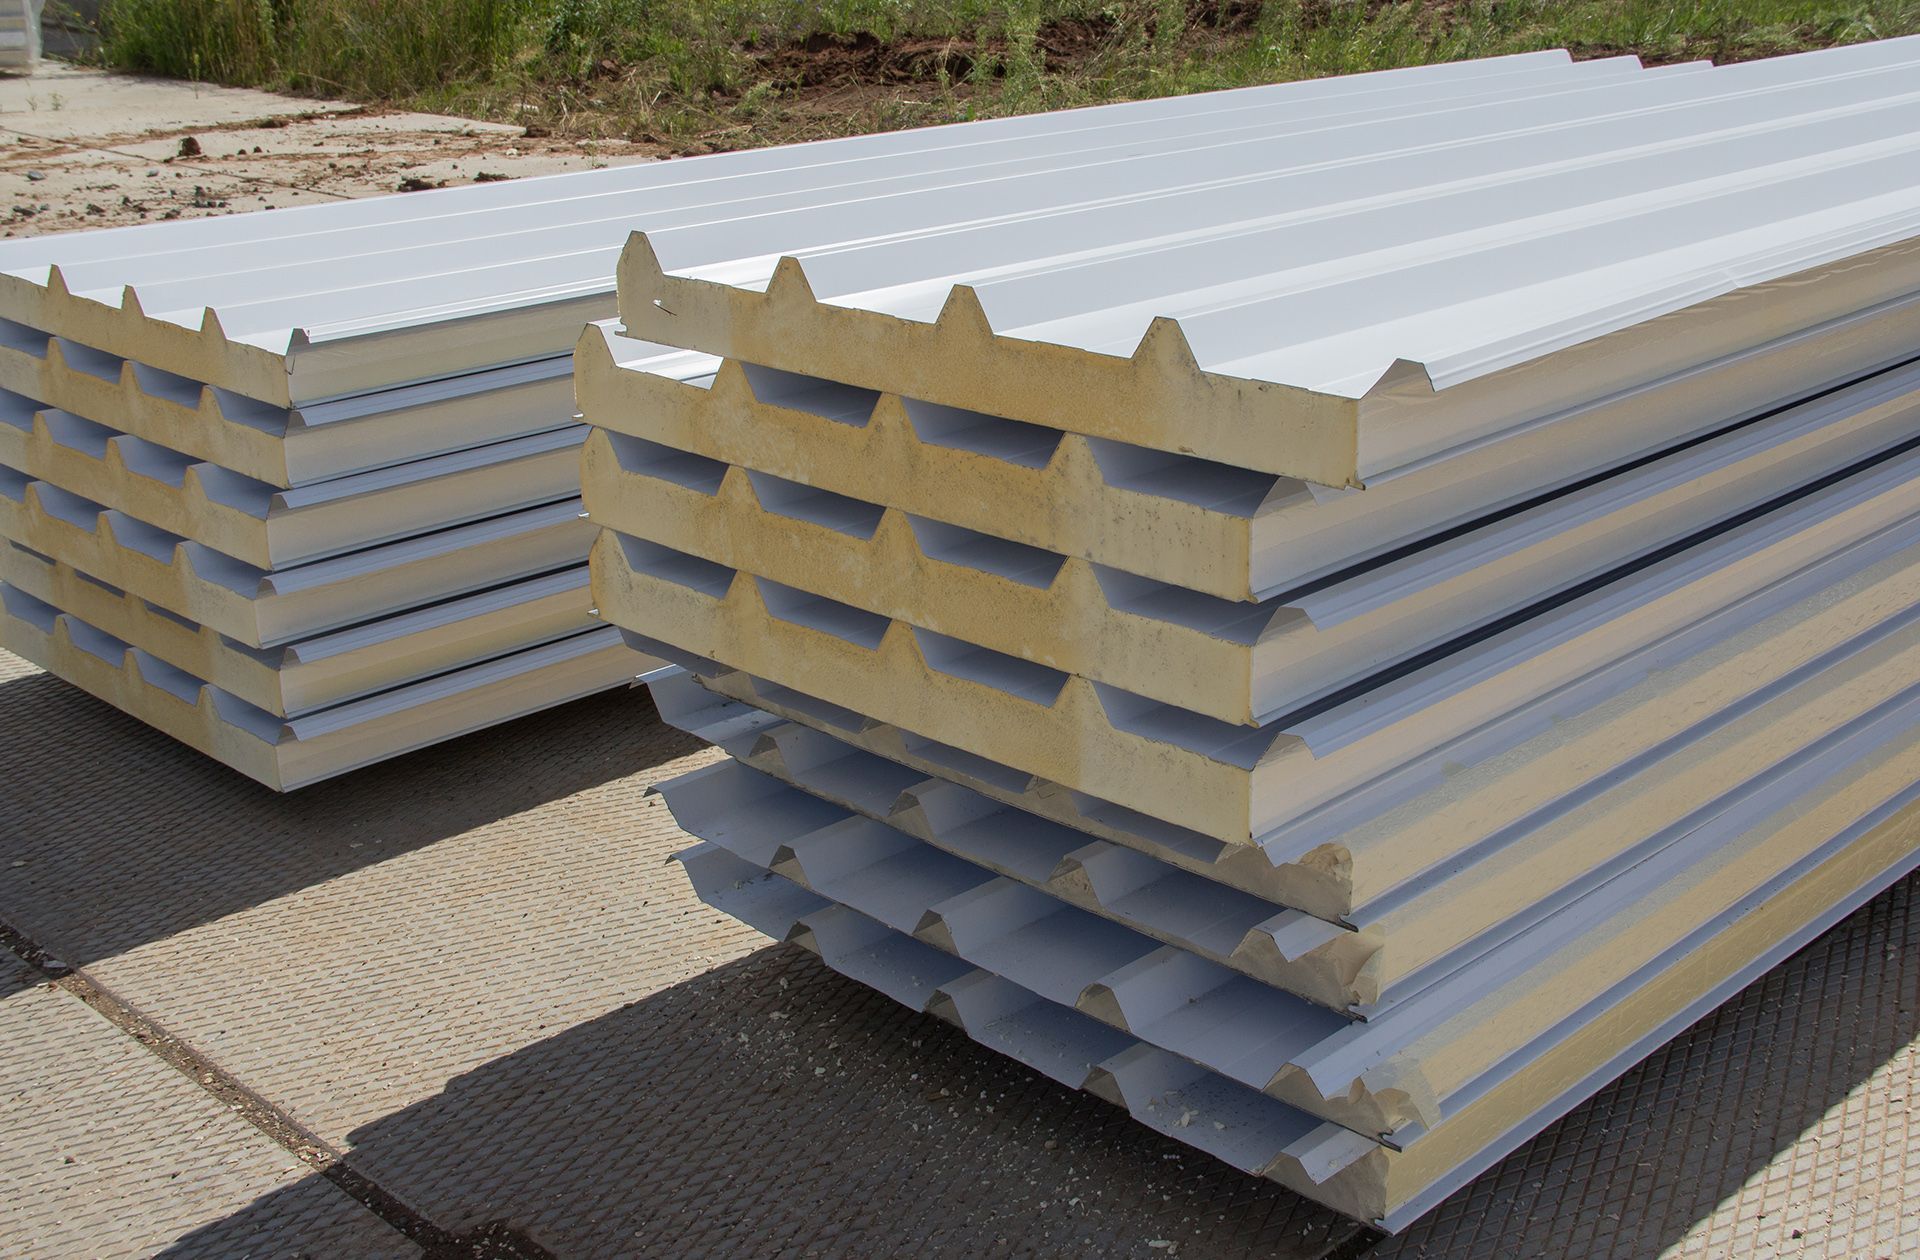 Insulated metal panels are a key component to modern pre-engineered steel building systems.